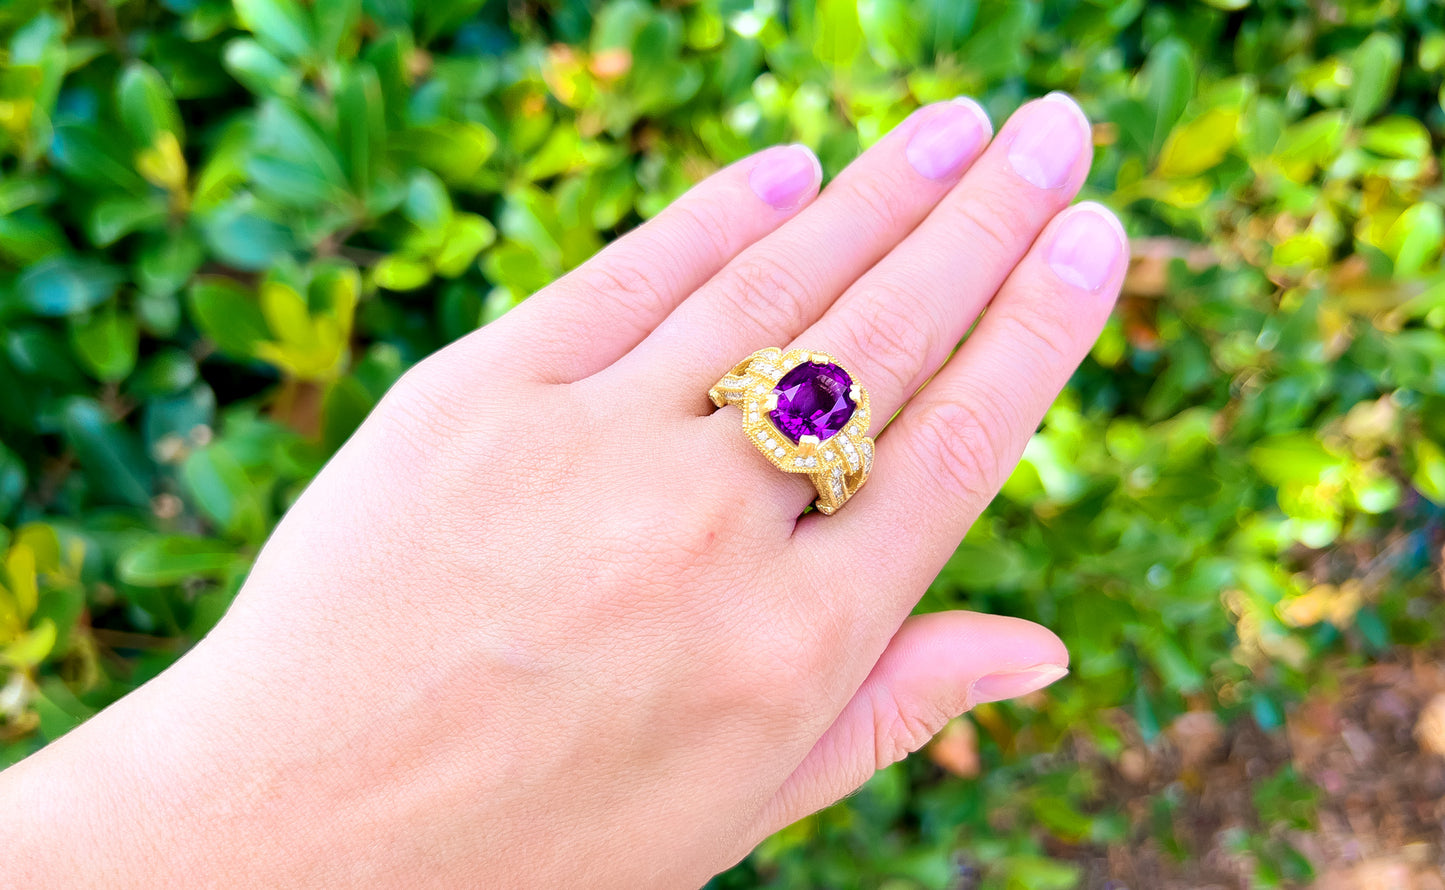 Amethyst 6 Carat Ring With Diamonds 1.50 Carats Total 14K Gold